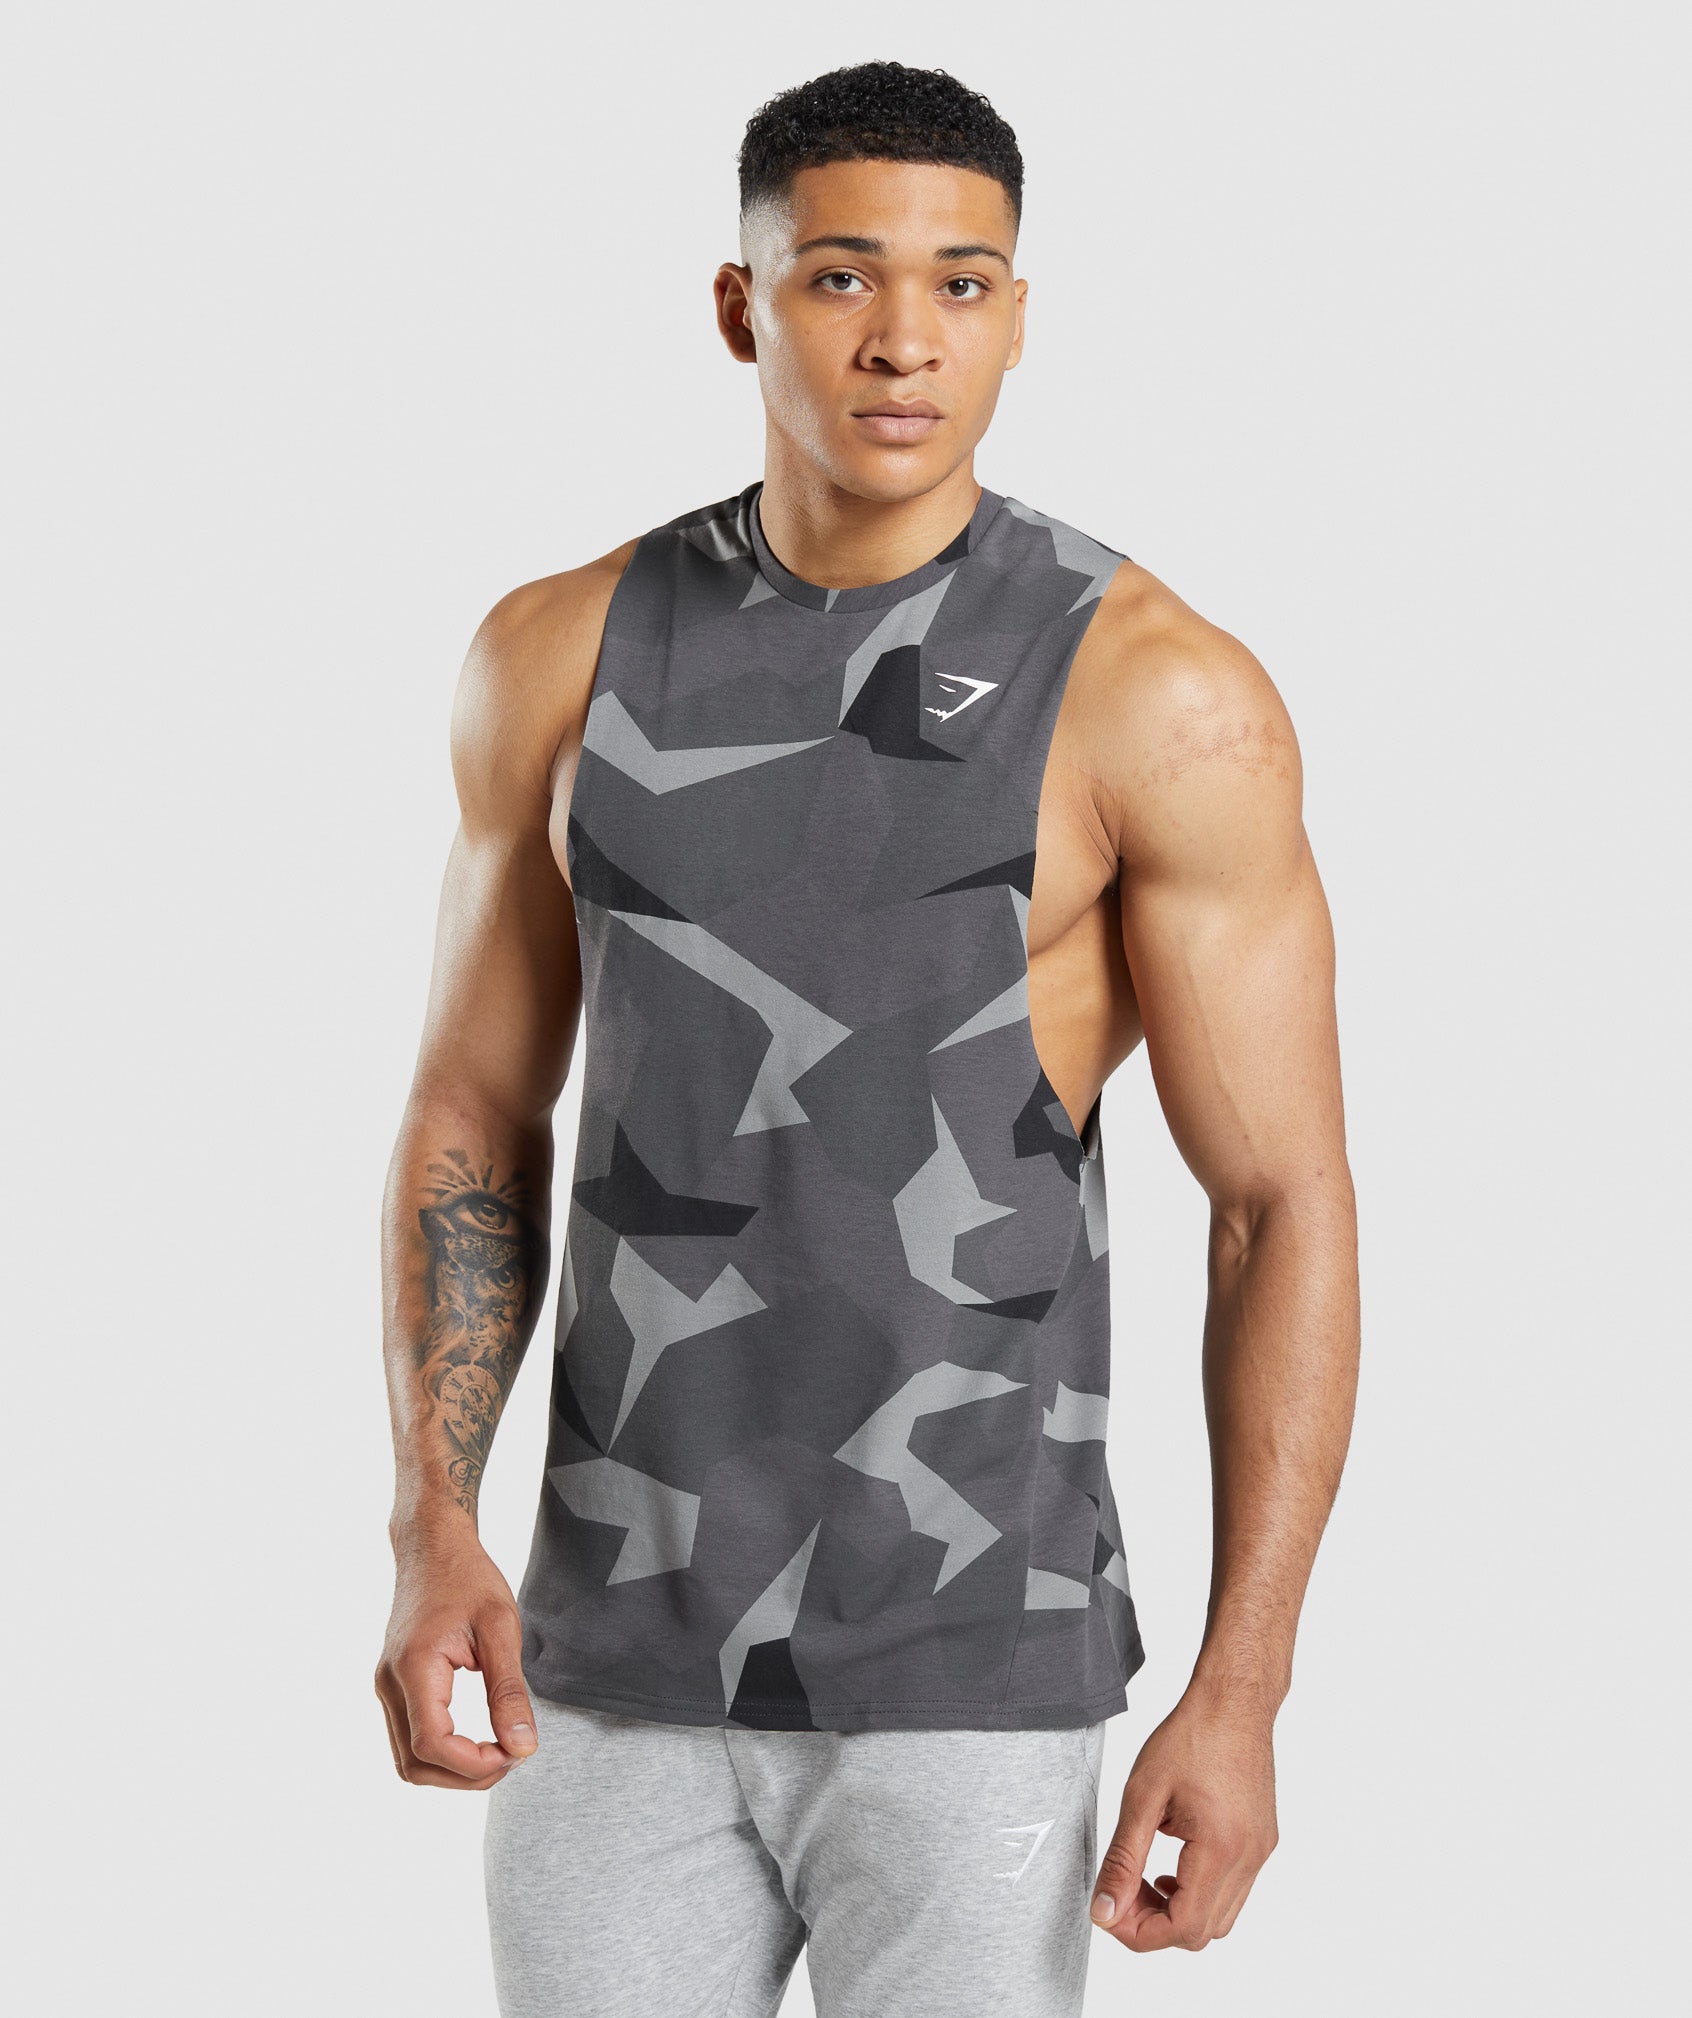 Critical 2.0 Drop Arm Tank in Black Print is out of stock